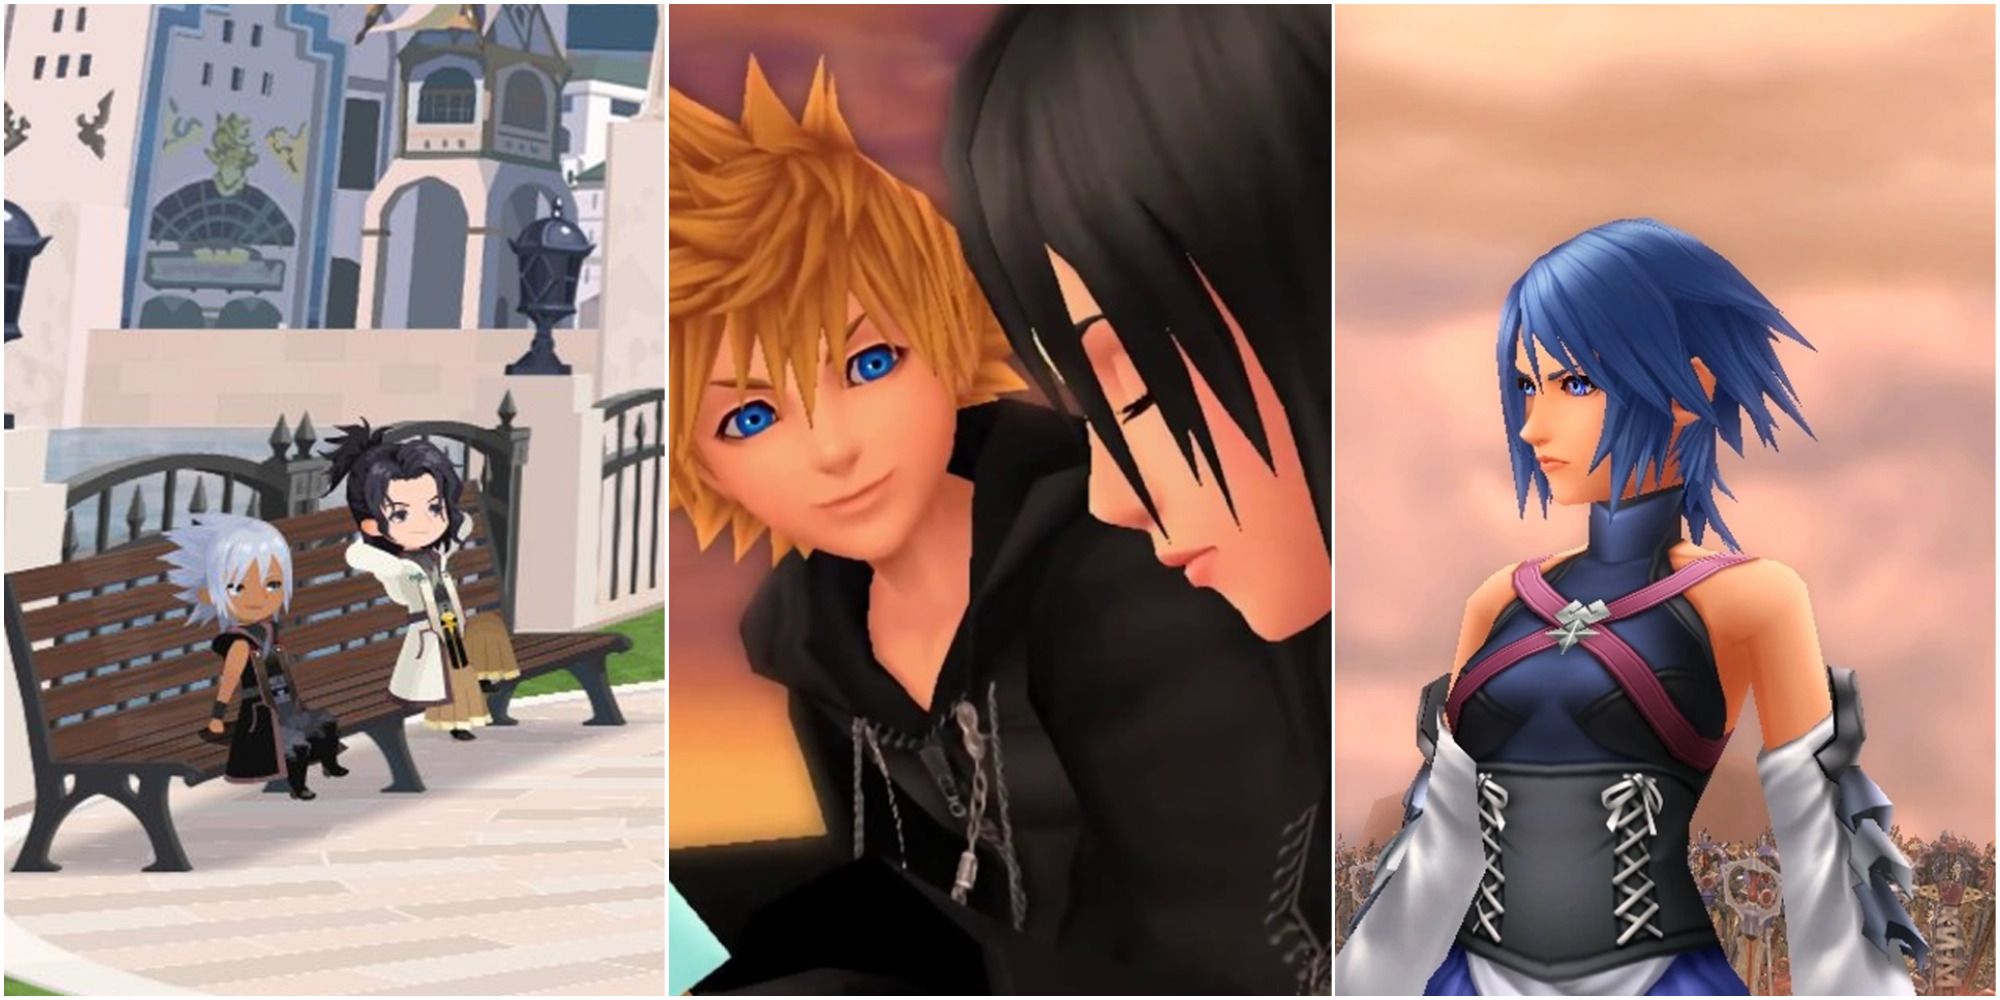 Kingdom Hearts - latest news, breaking stories and comment - The Independent